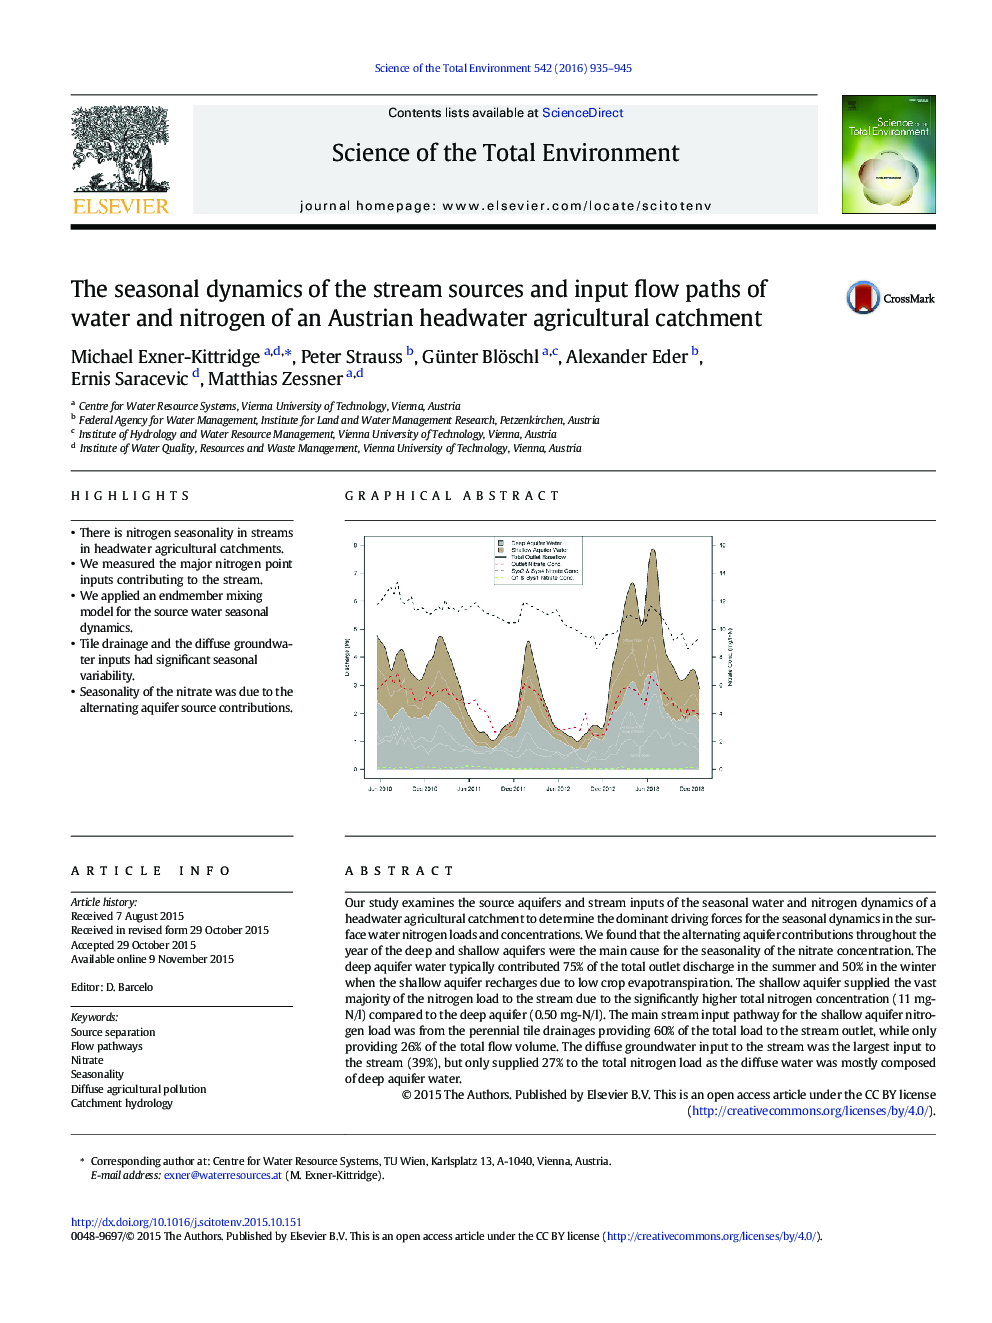 The seasonal dynamics of the stream sources and input flow paths of water and nitrogen of an Austrian headwater agricultural catchment